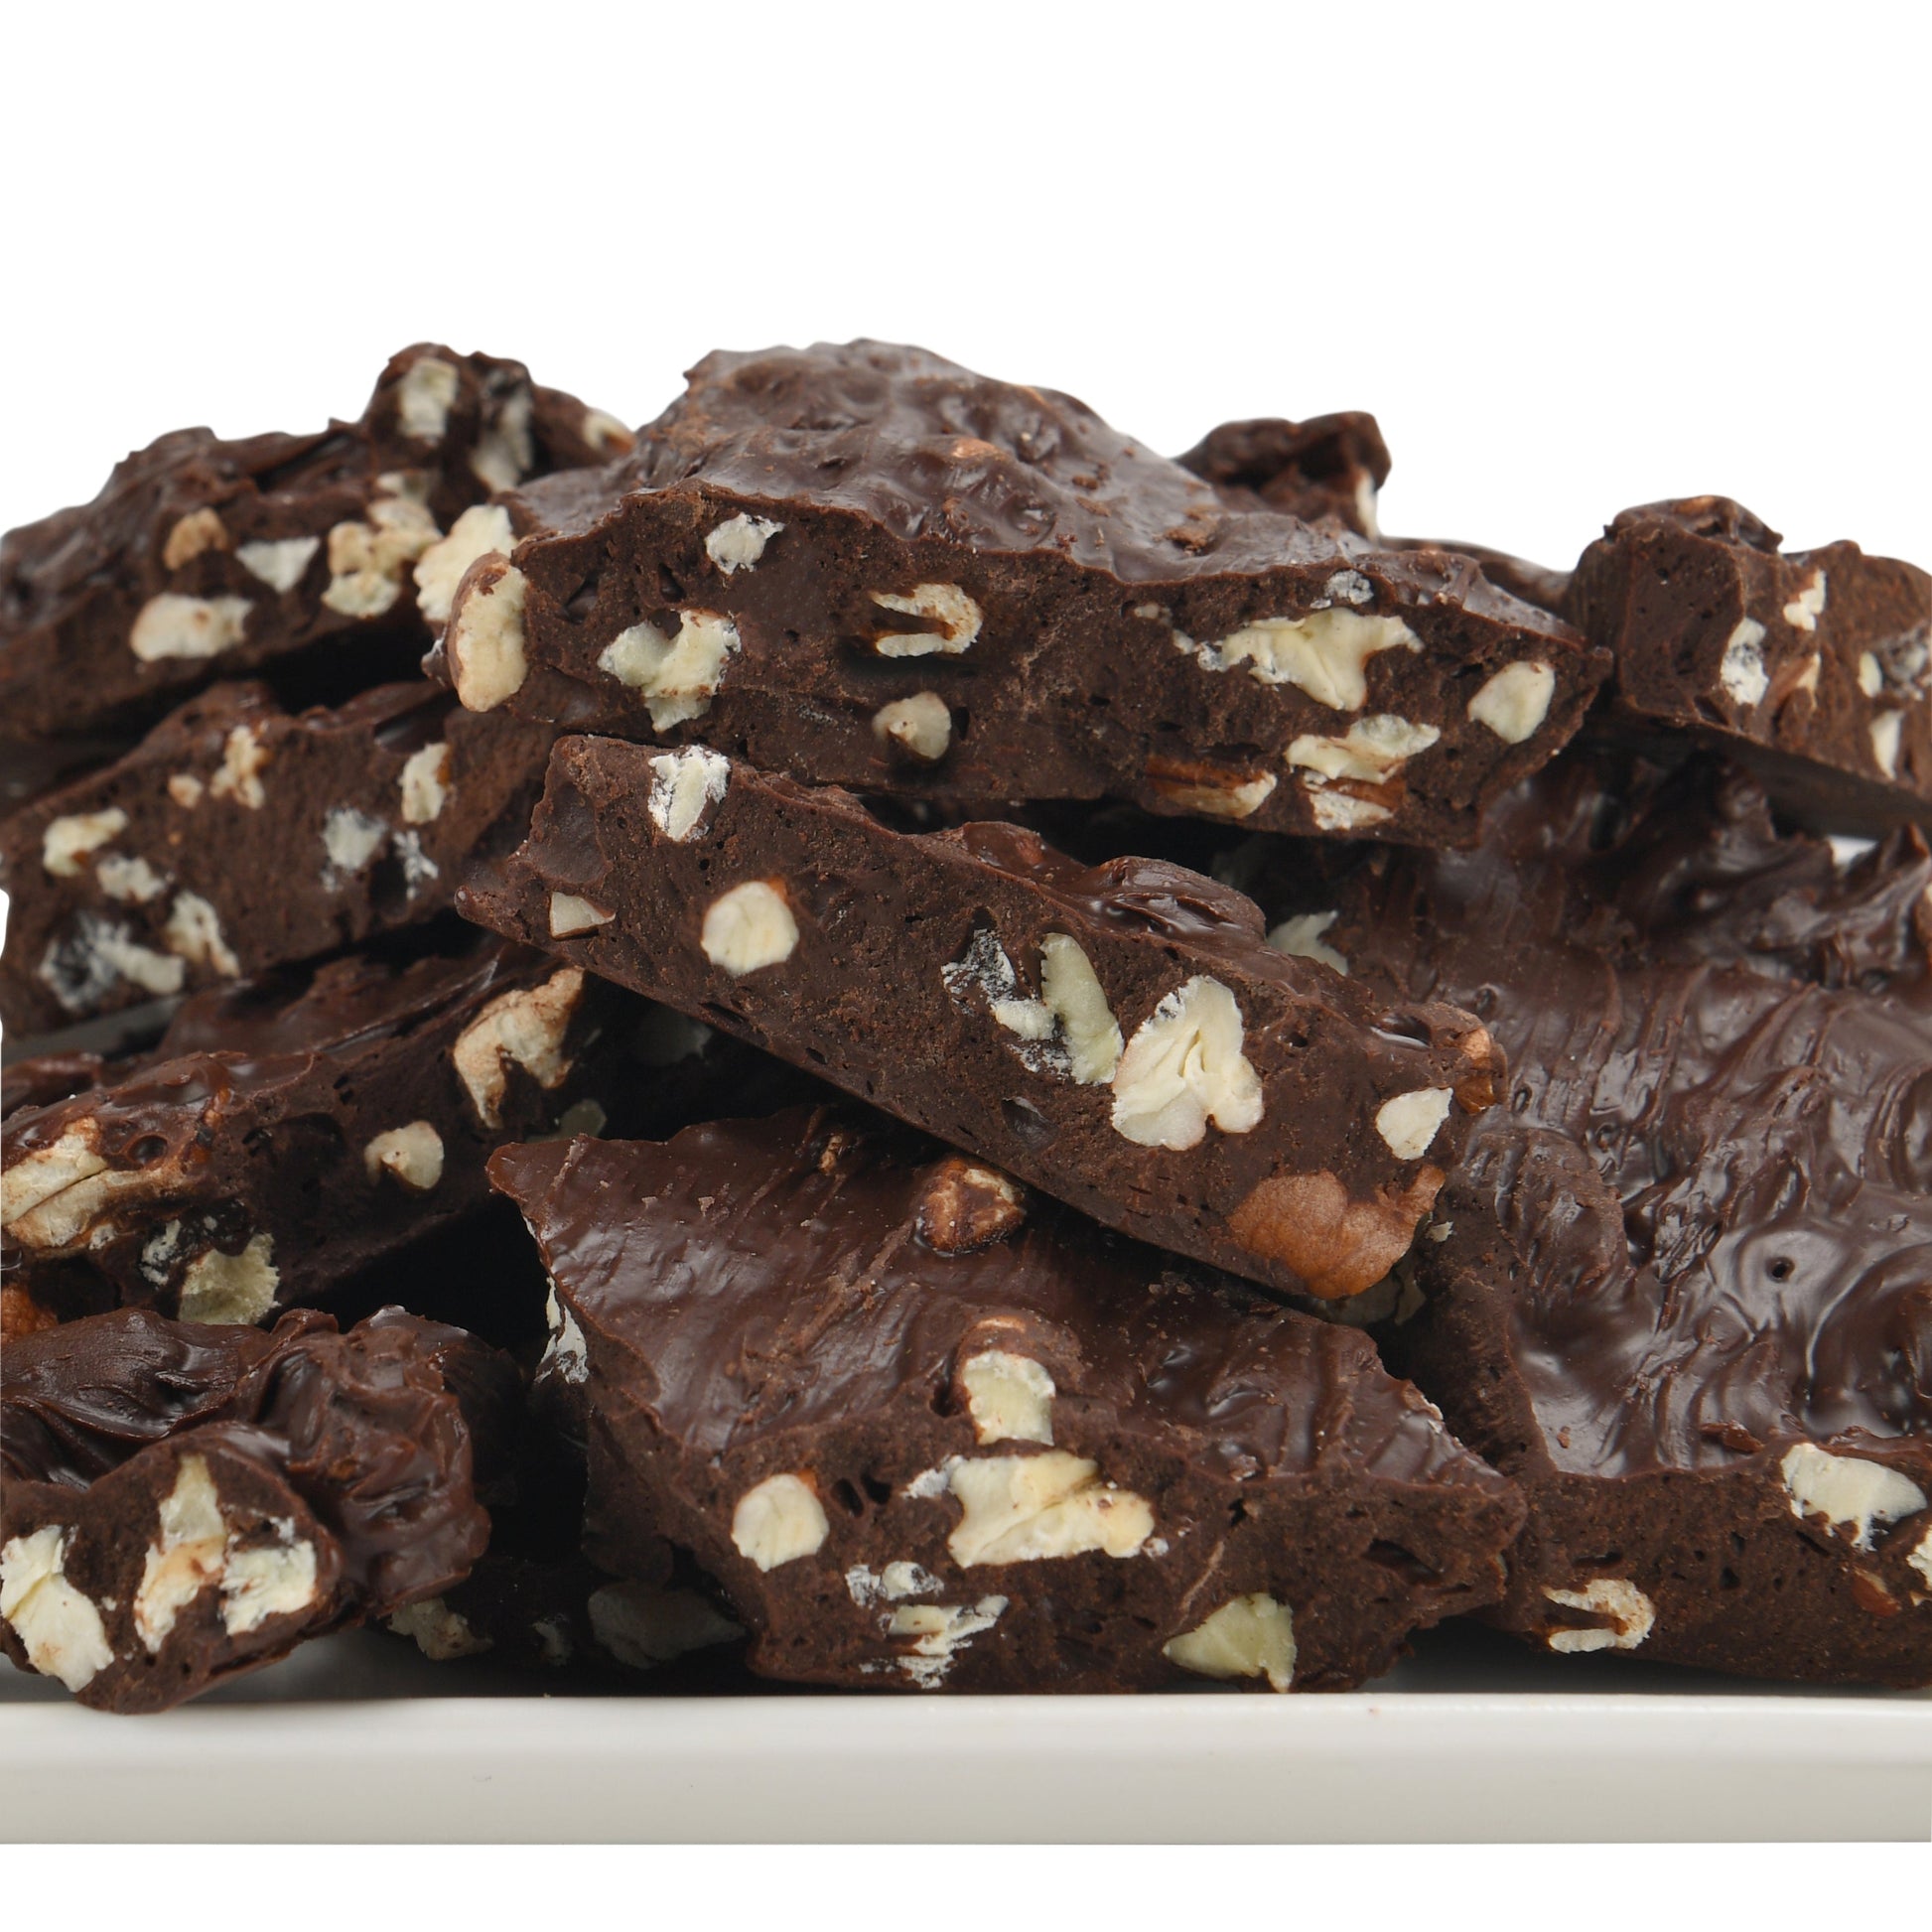 Our dark chocolate pecan bark is sure to delight